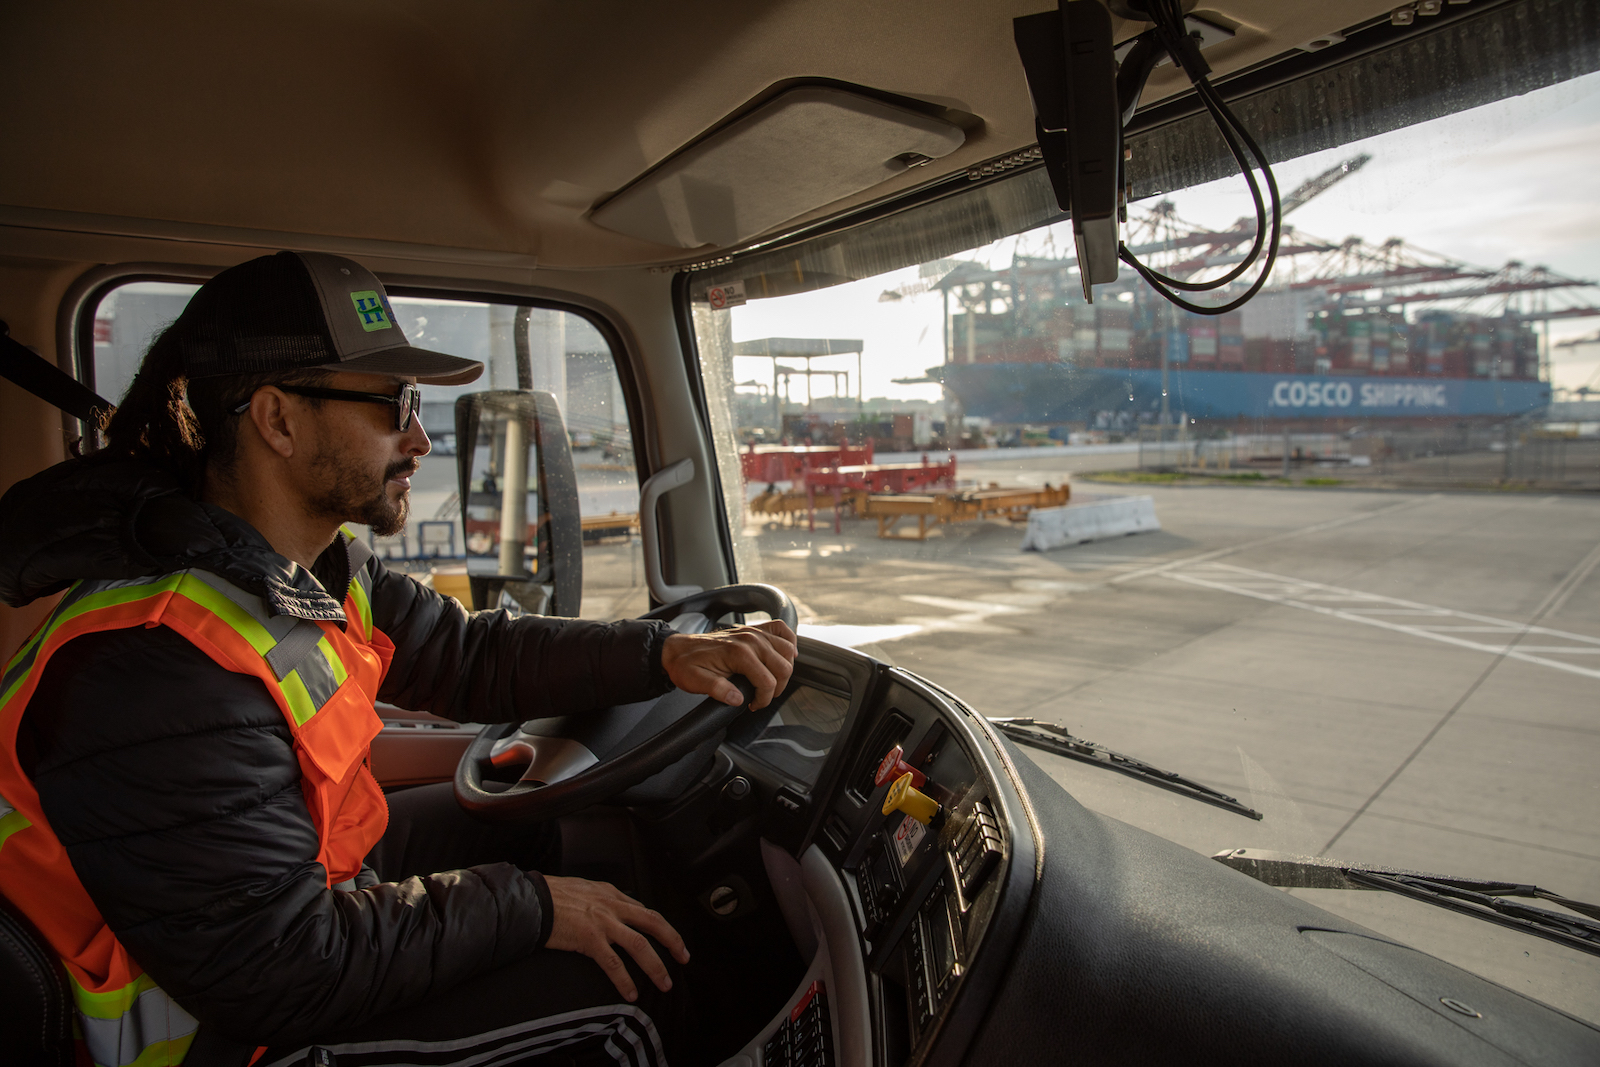 a man in an orange vest and trucker hat sits inside the cab of a large truck driving near shipping containers